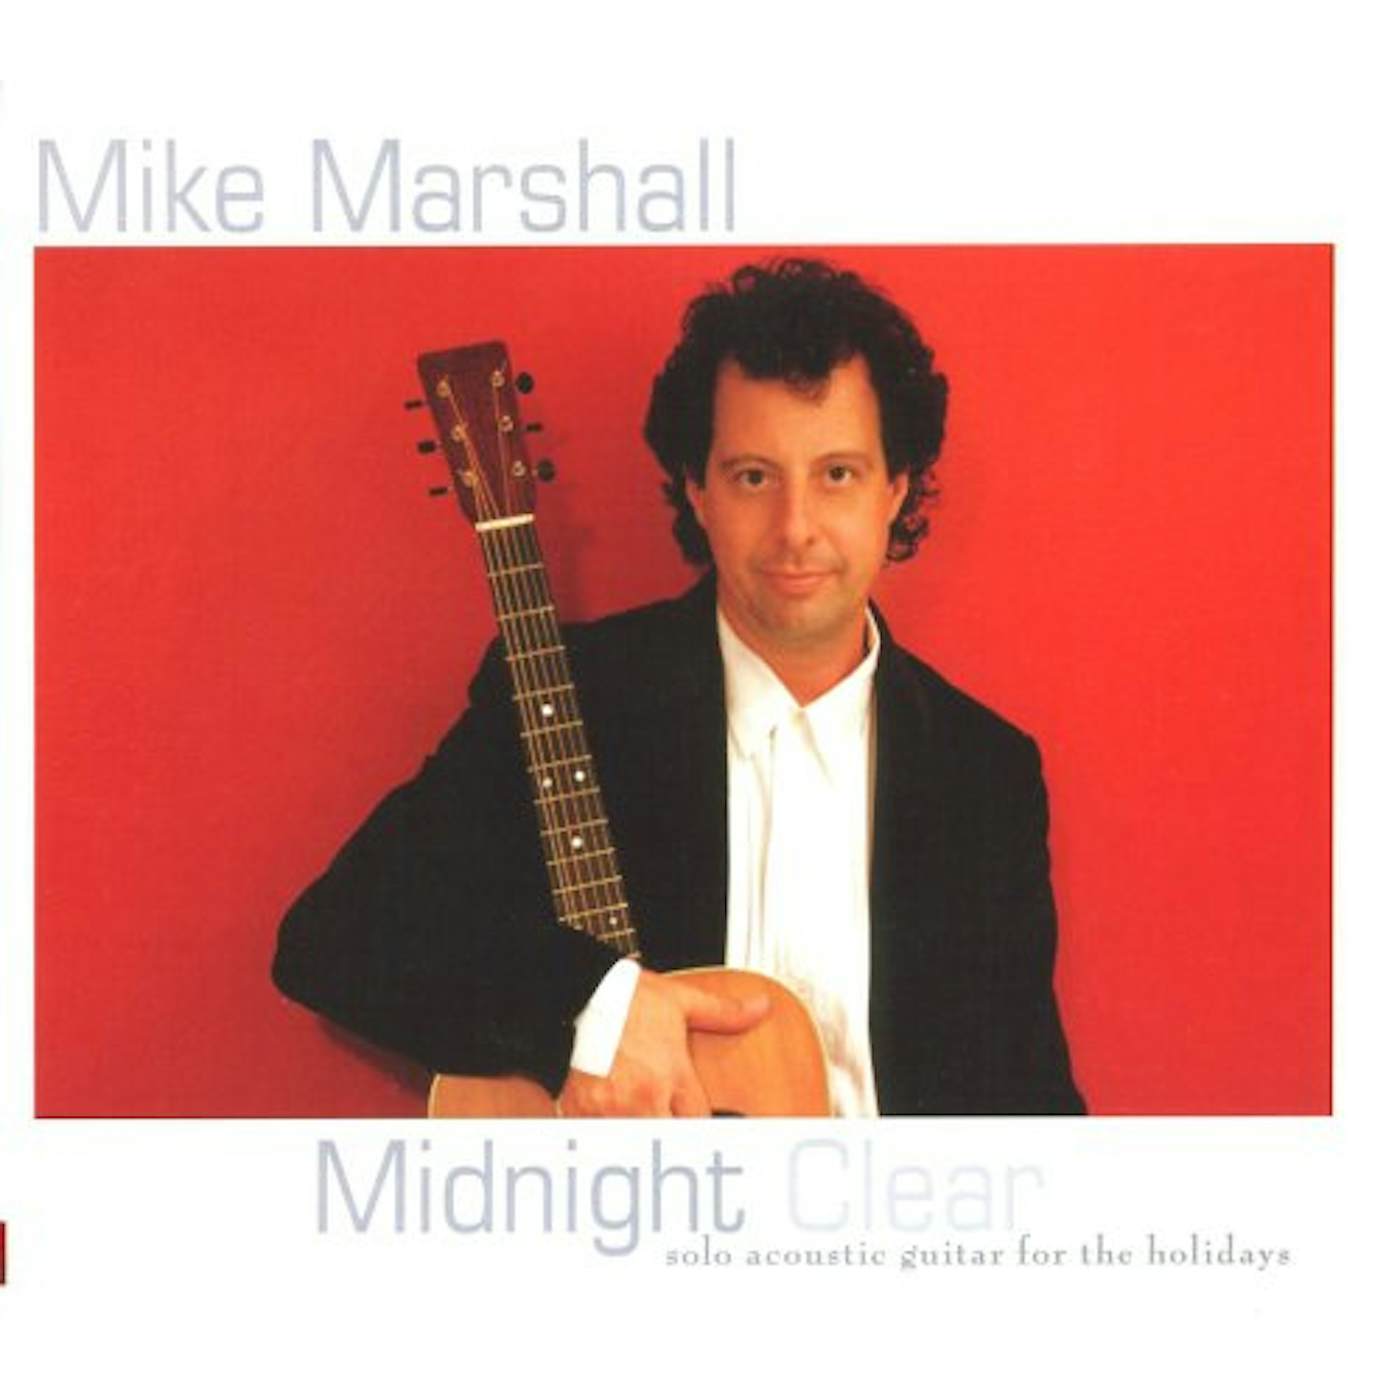 Mike Marshall MIDNIGHT CLEAR CD